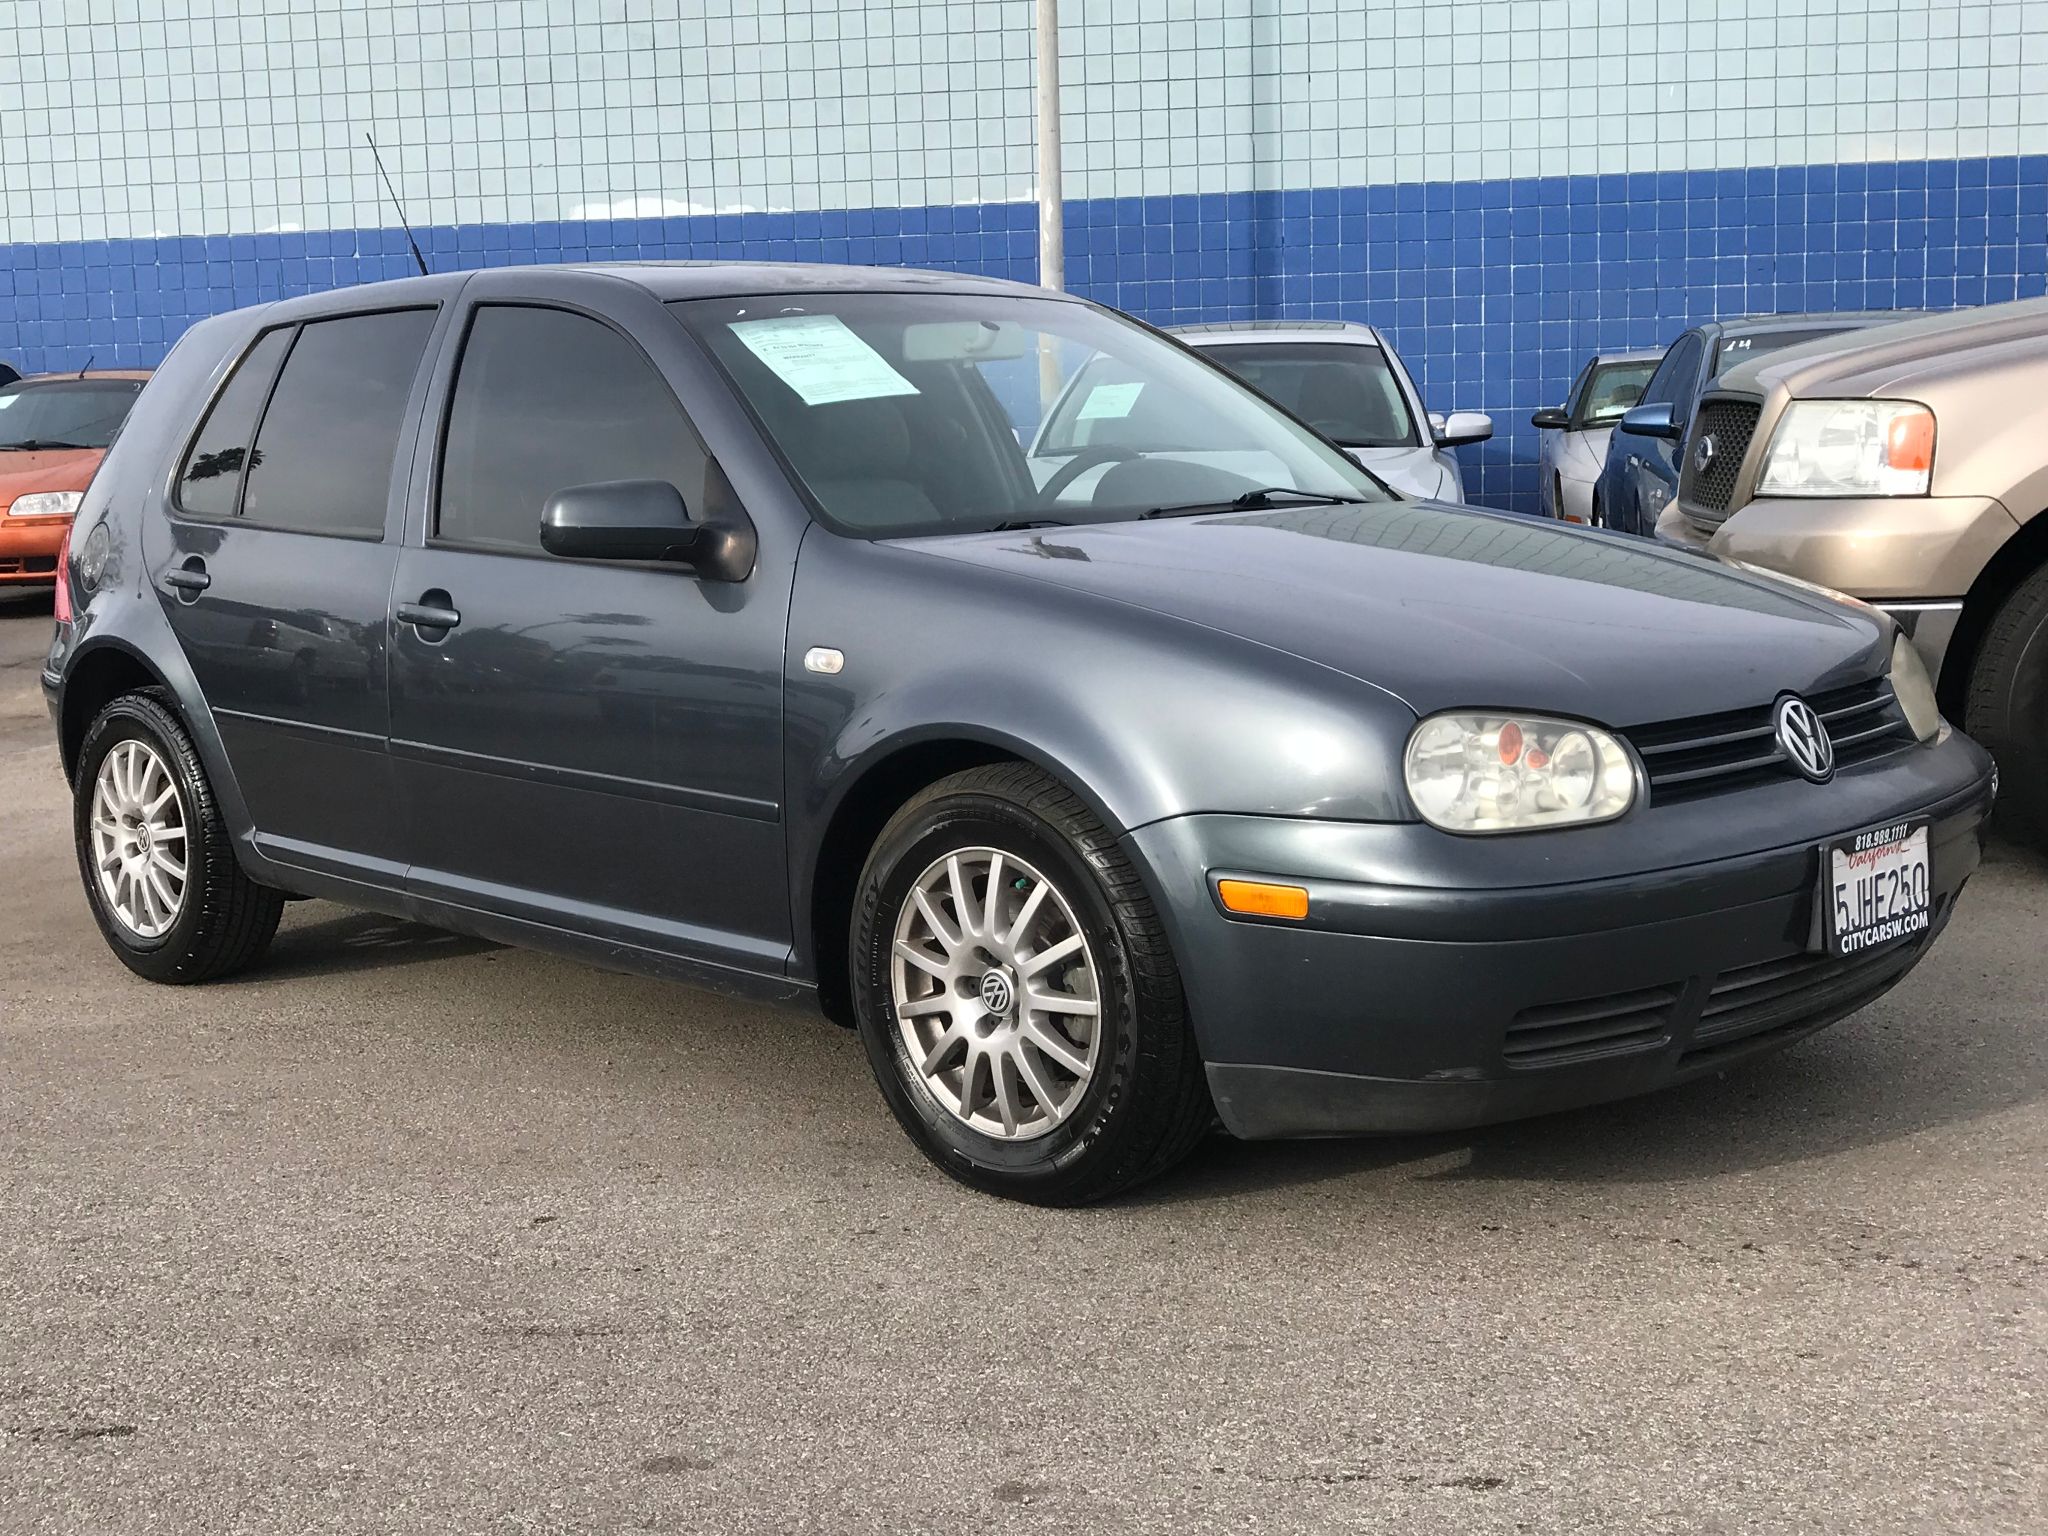 Used 2004 Volkswagen Golf GLS at City Cars Warehouse INC